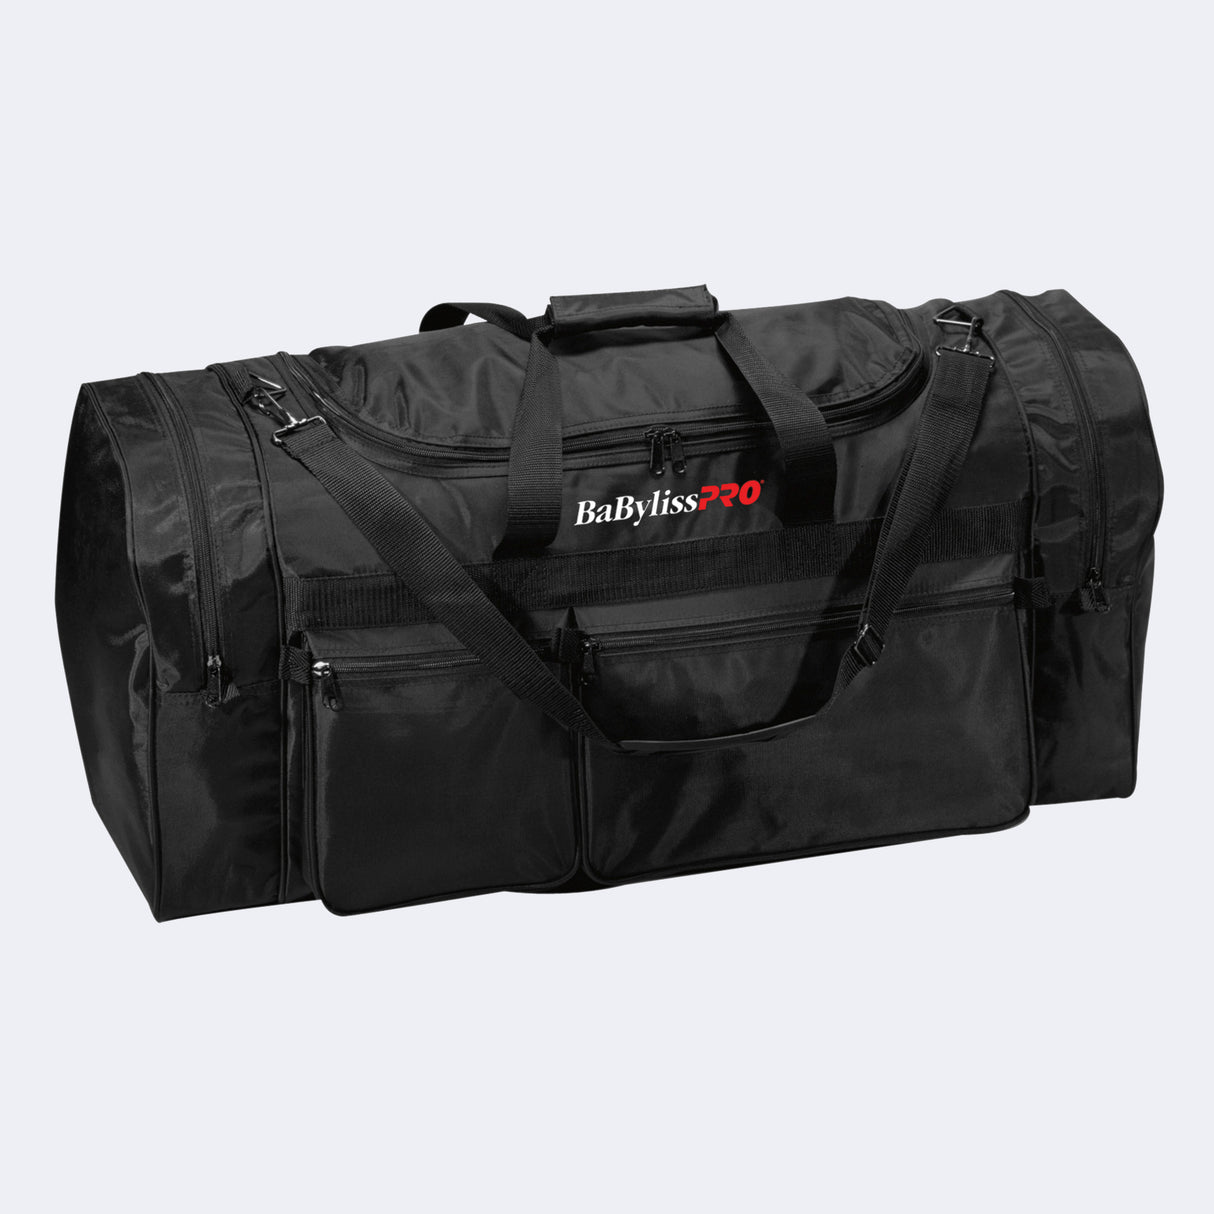 BabylissPro Carry-All Bag